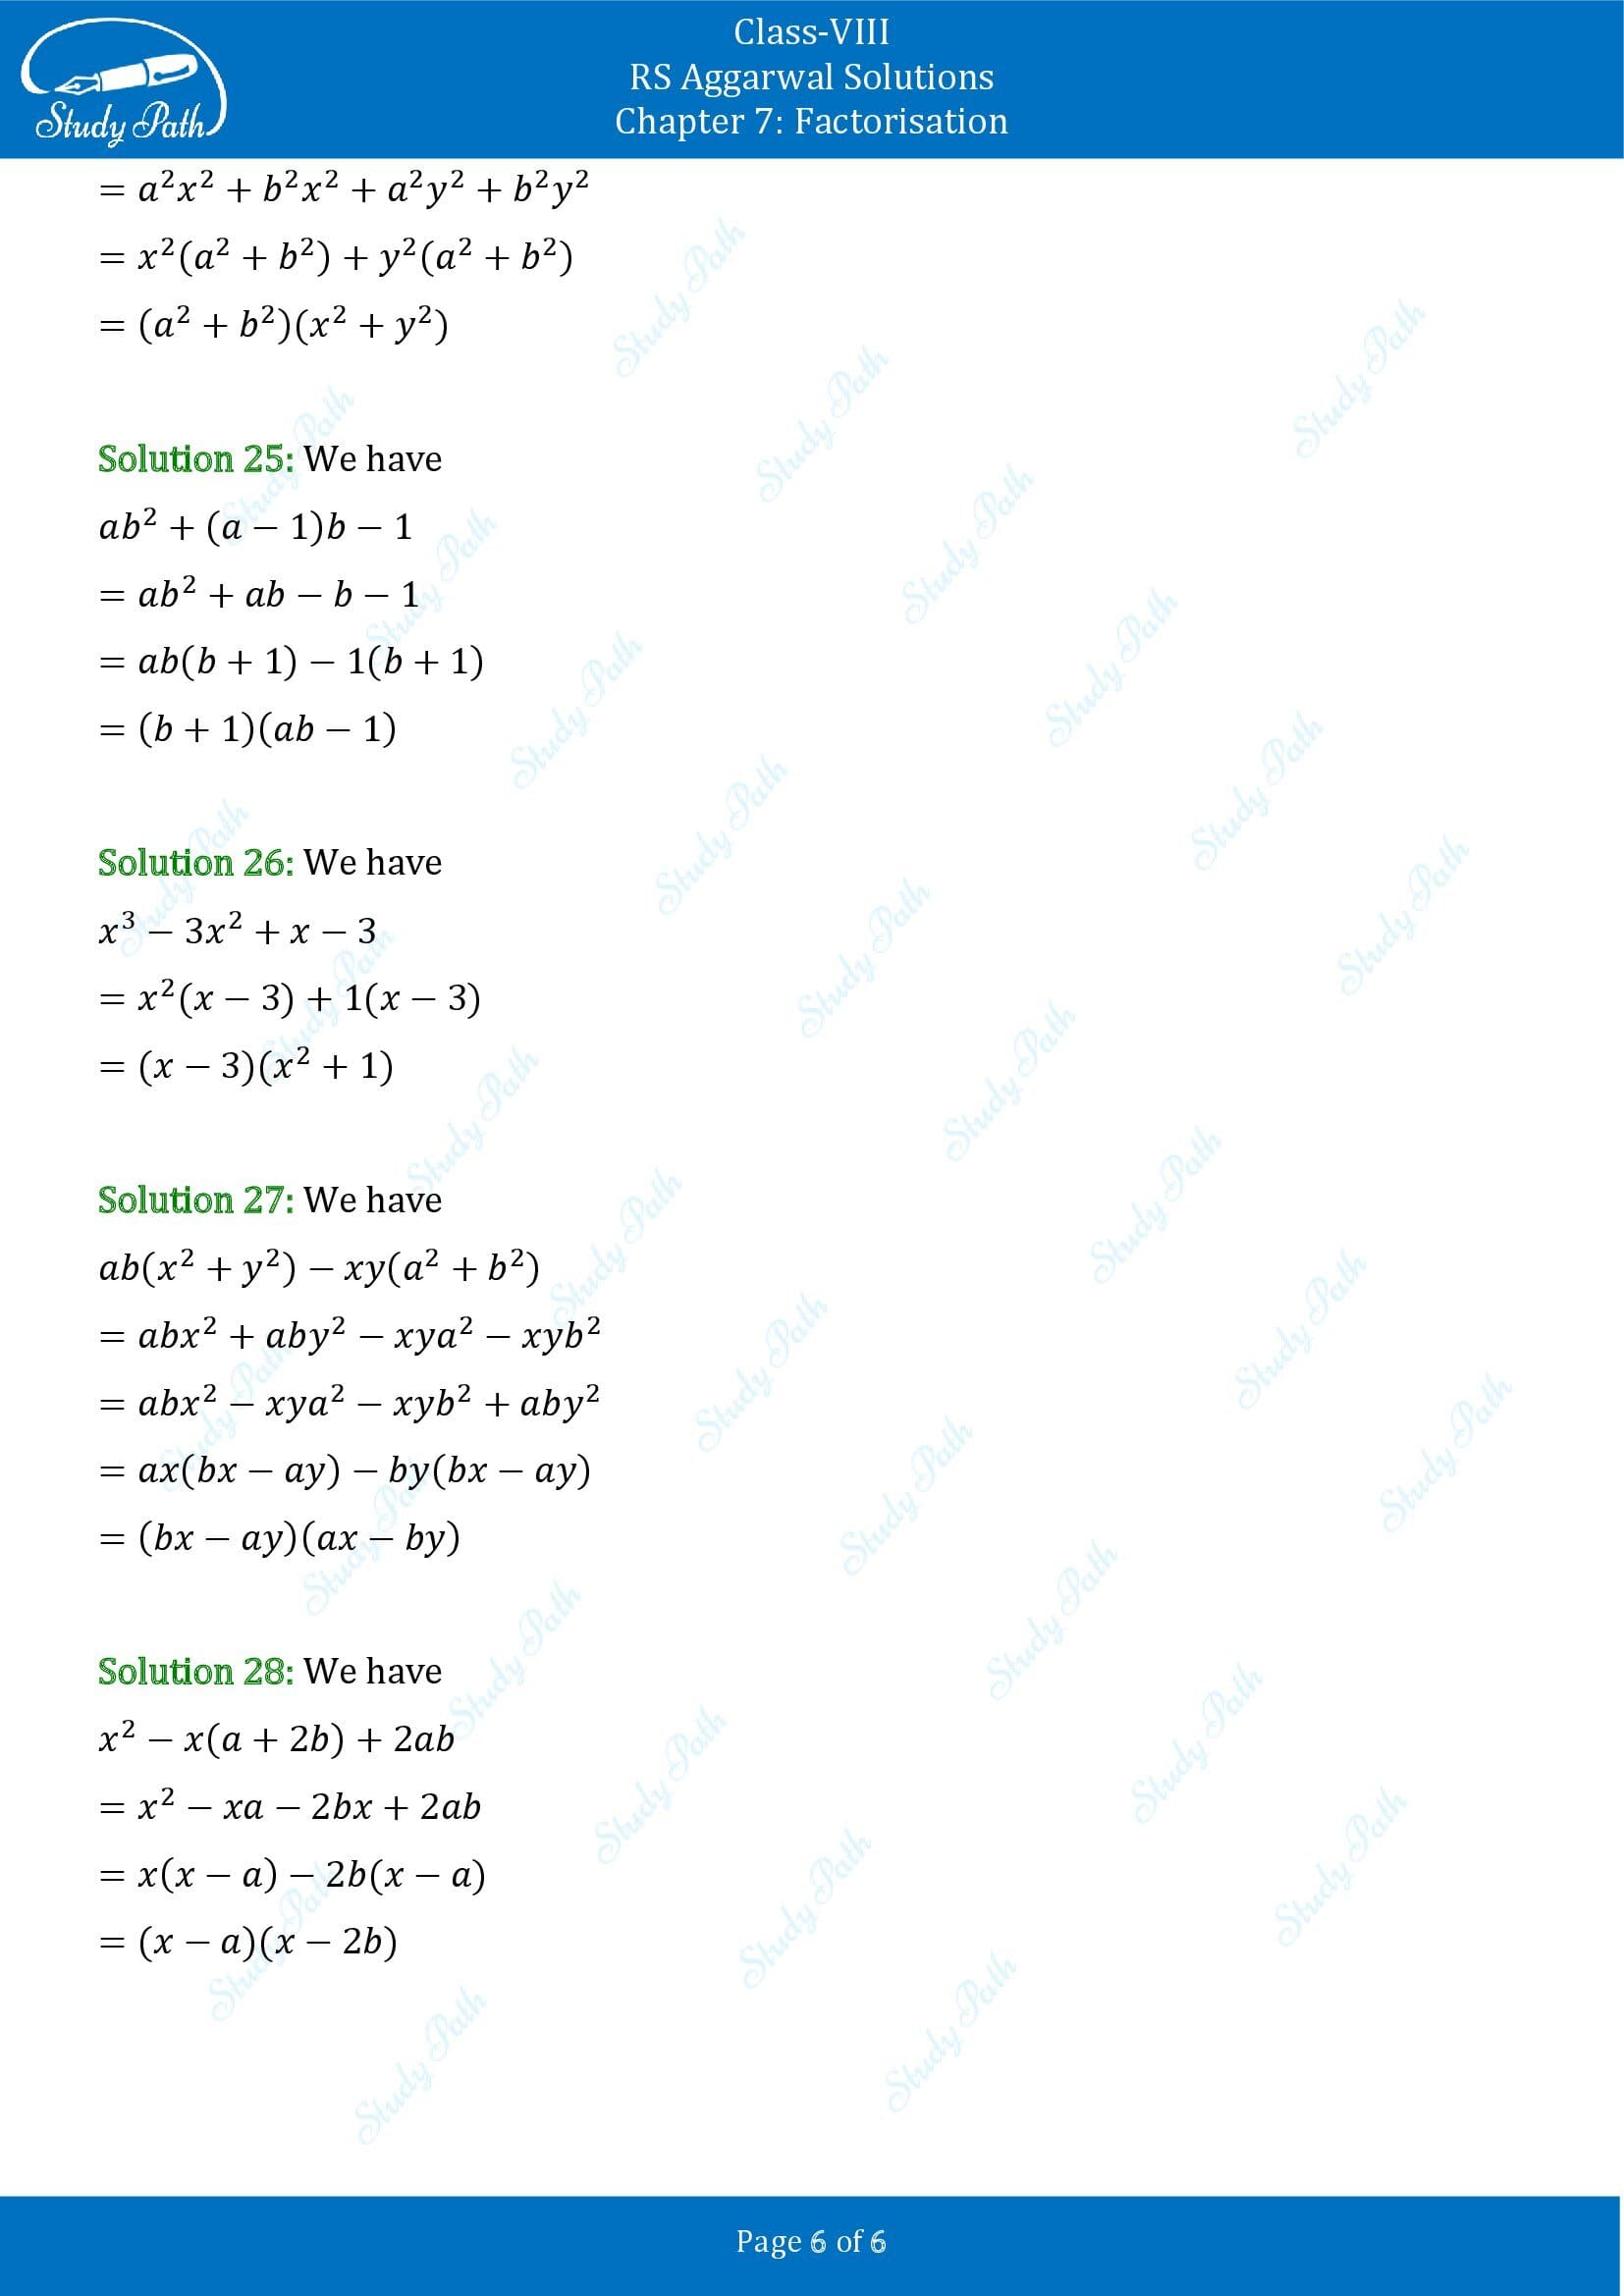 RS Aggarwal Solutions Class 8 Chapter 7 Factorisation Exercise 7A 00006